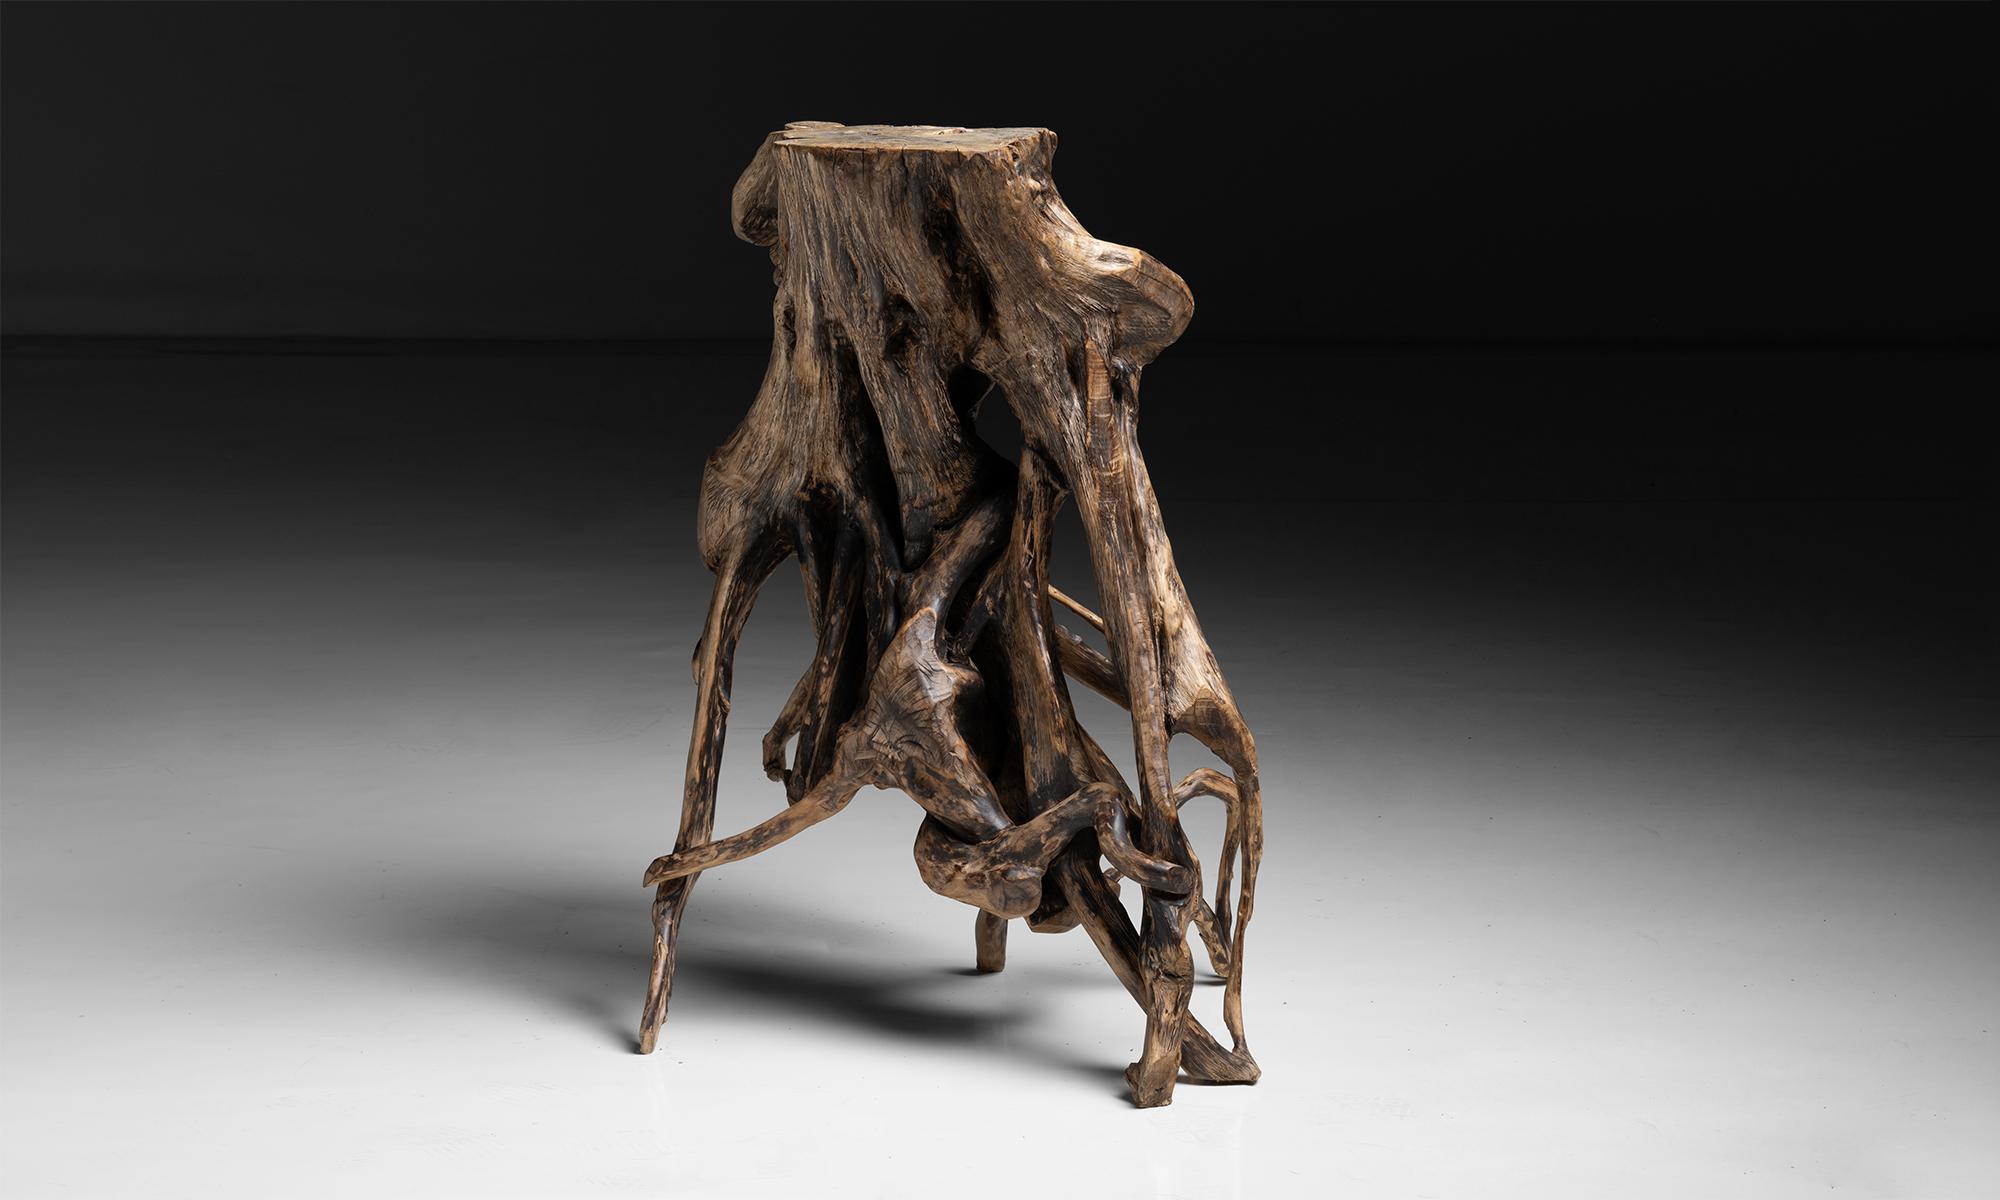 Tree Root Stand

Japan circa 1900

Made from a single tree.

24”w x 24”d x 32.5”h